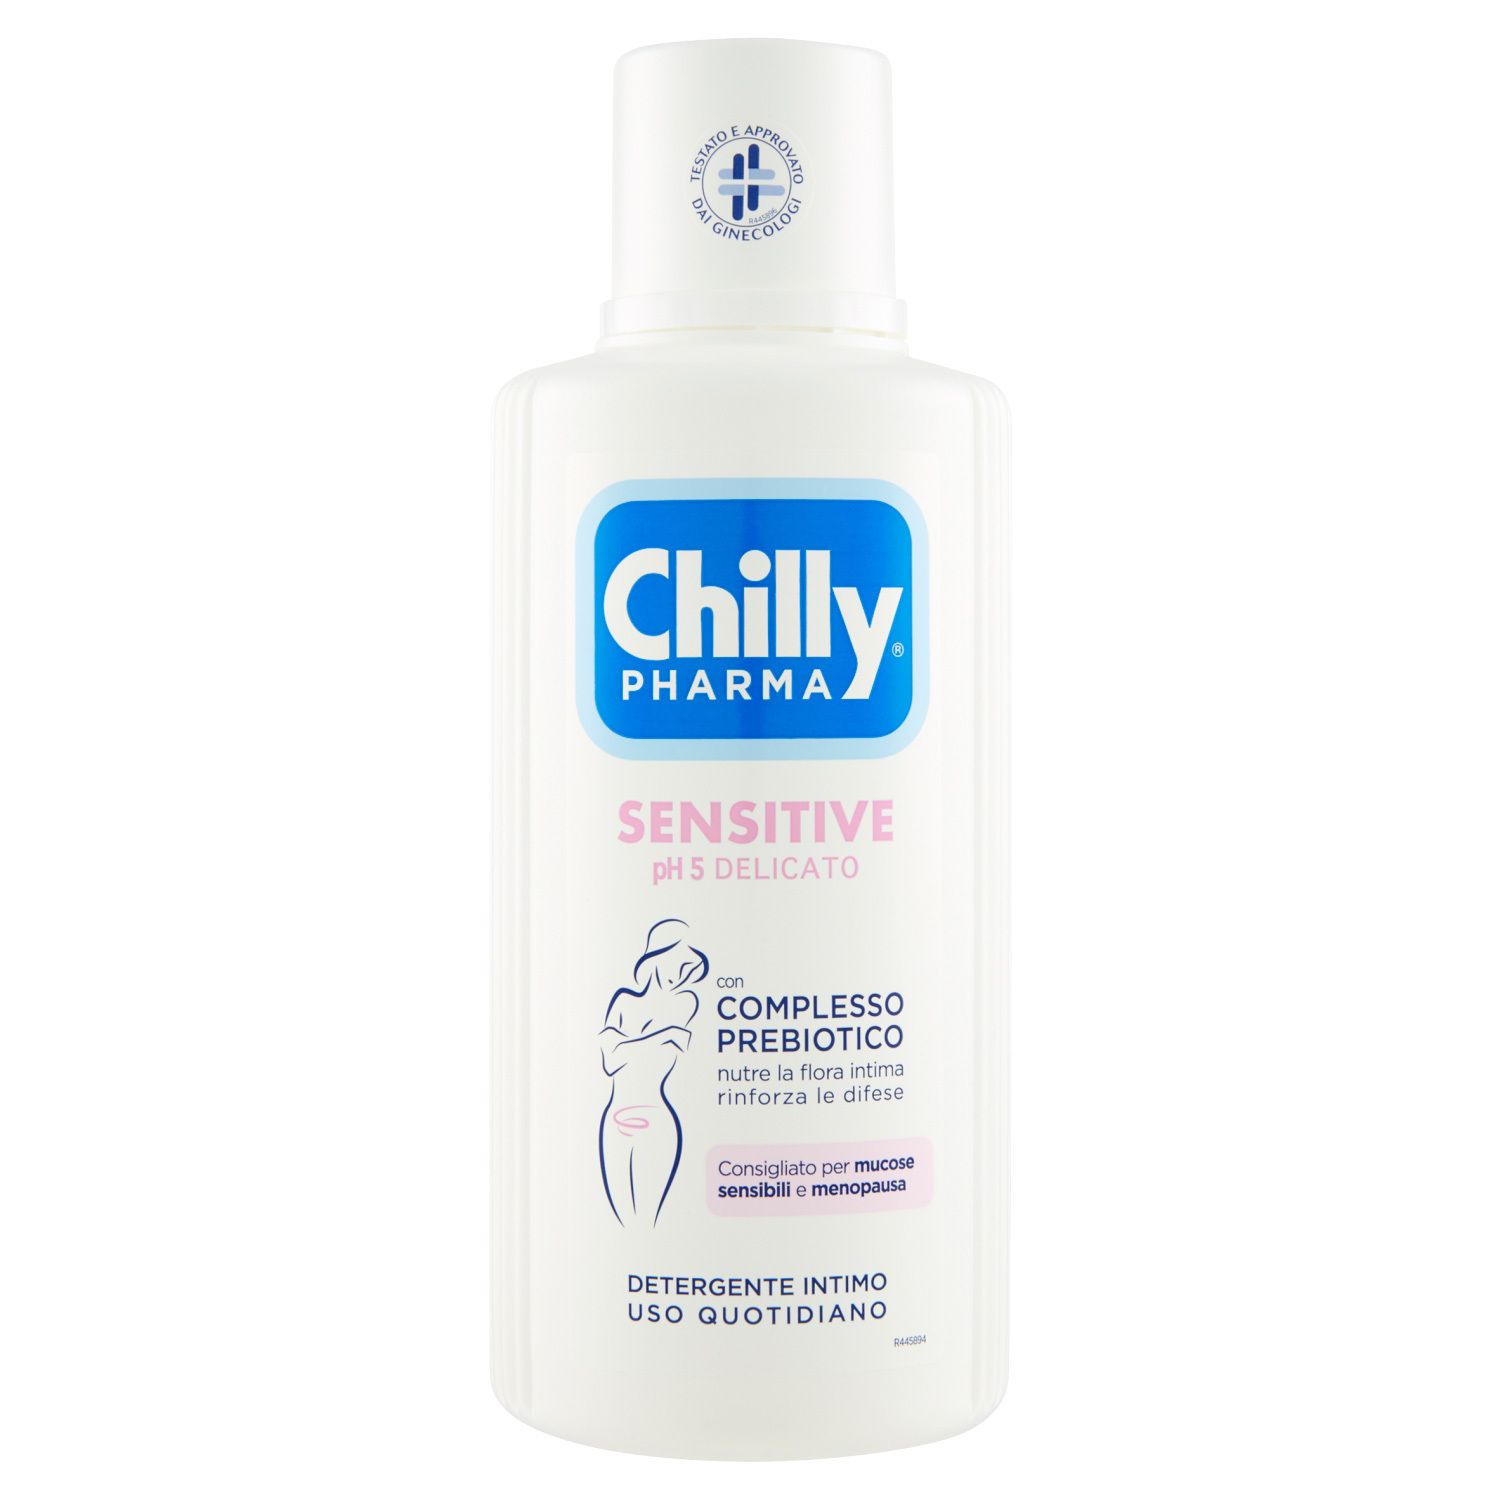 CHILLY INTIMO 450ML SENSITIVE